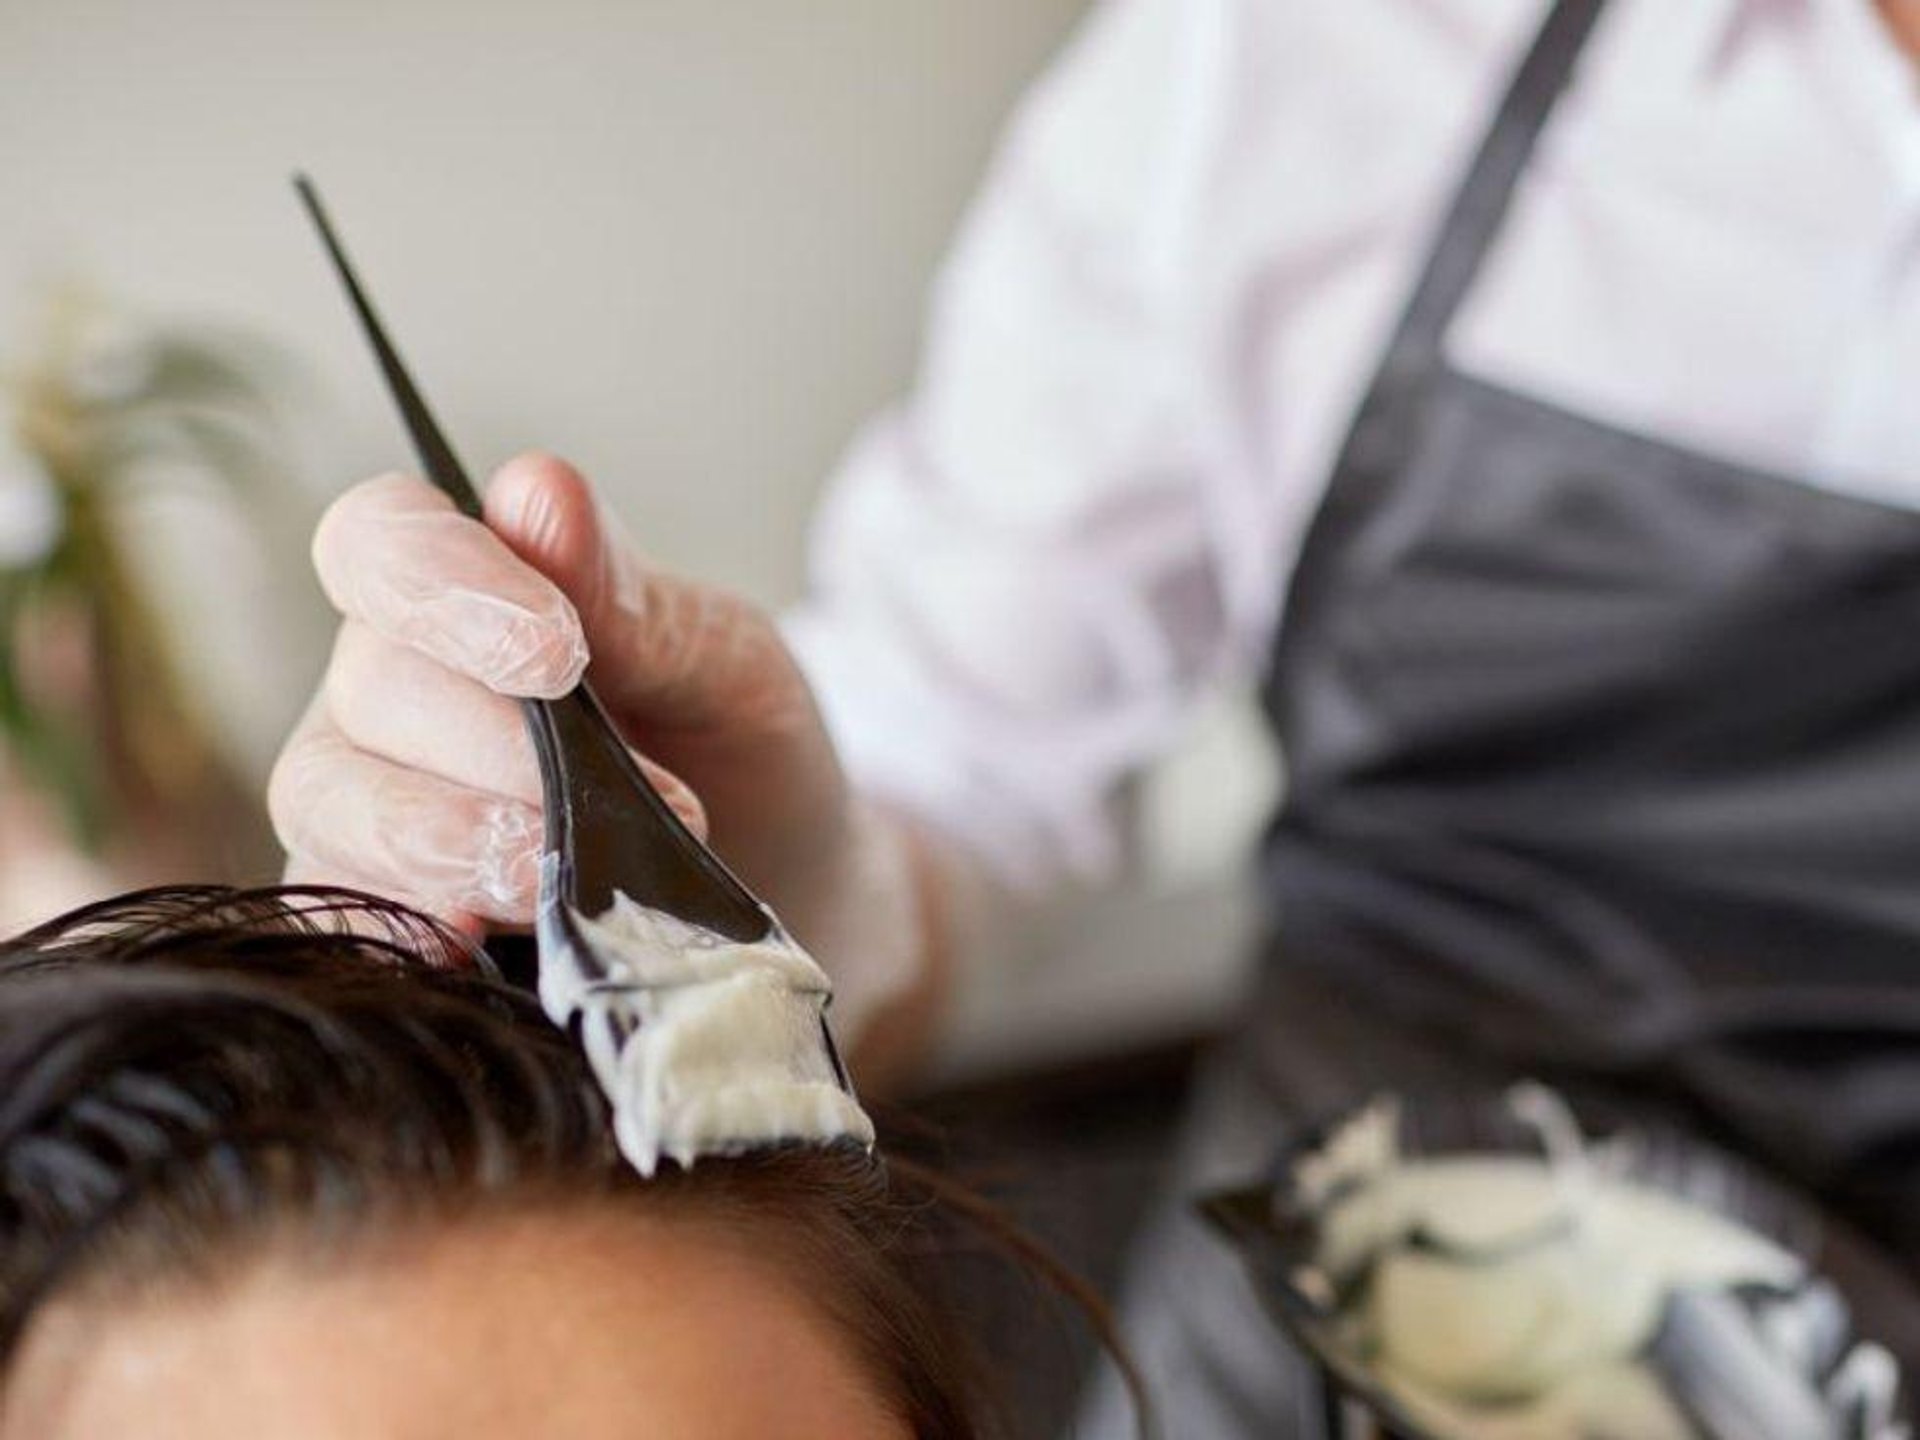  Dyeing Your Hair? Beware Chemical Burns